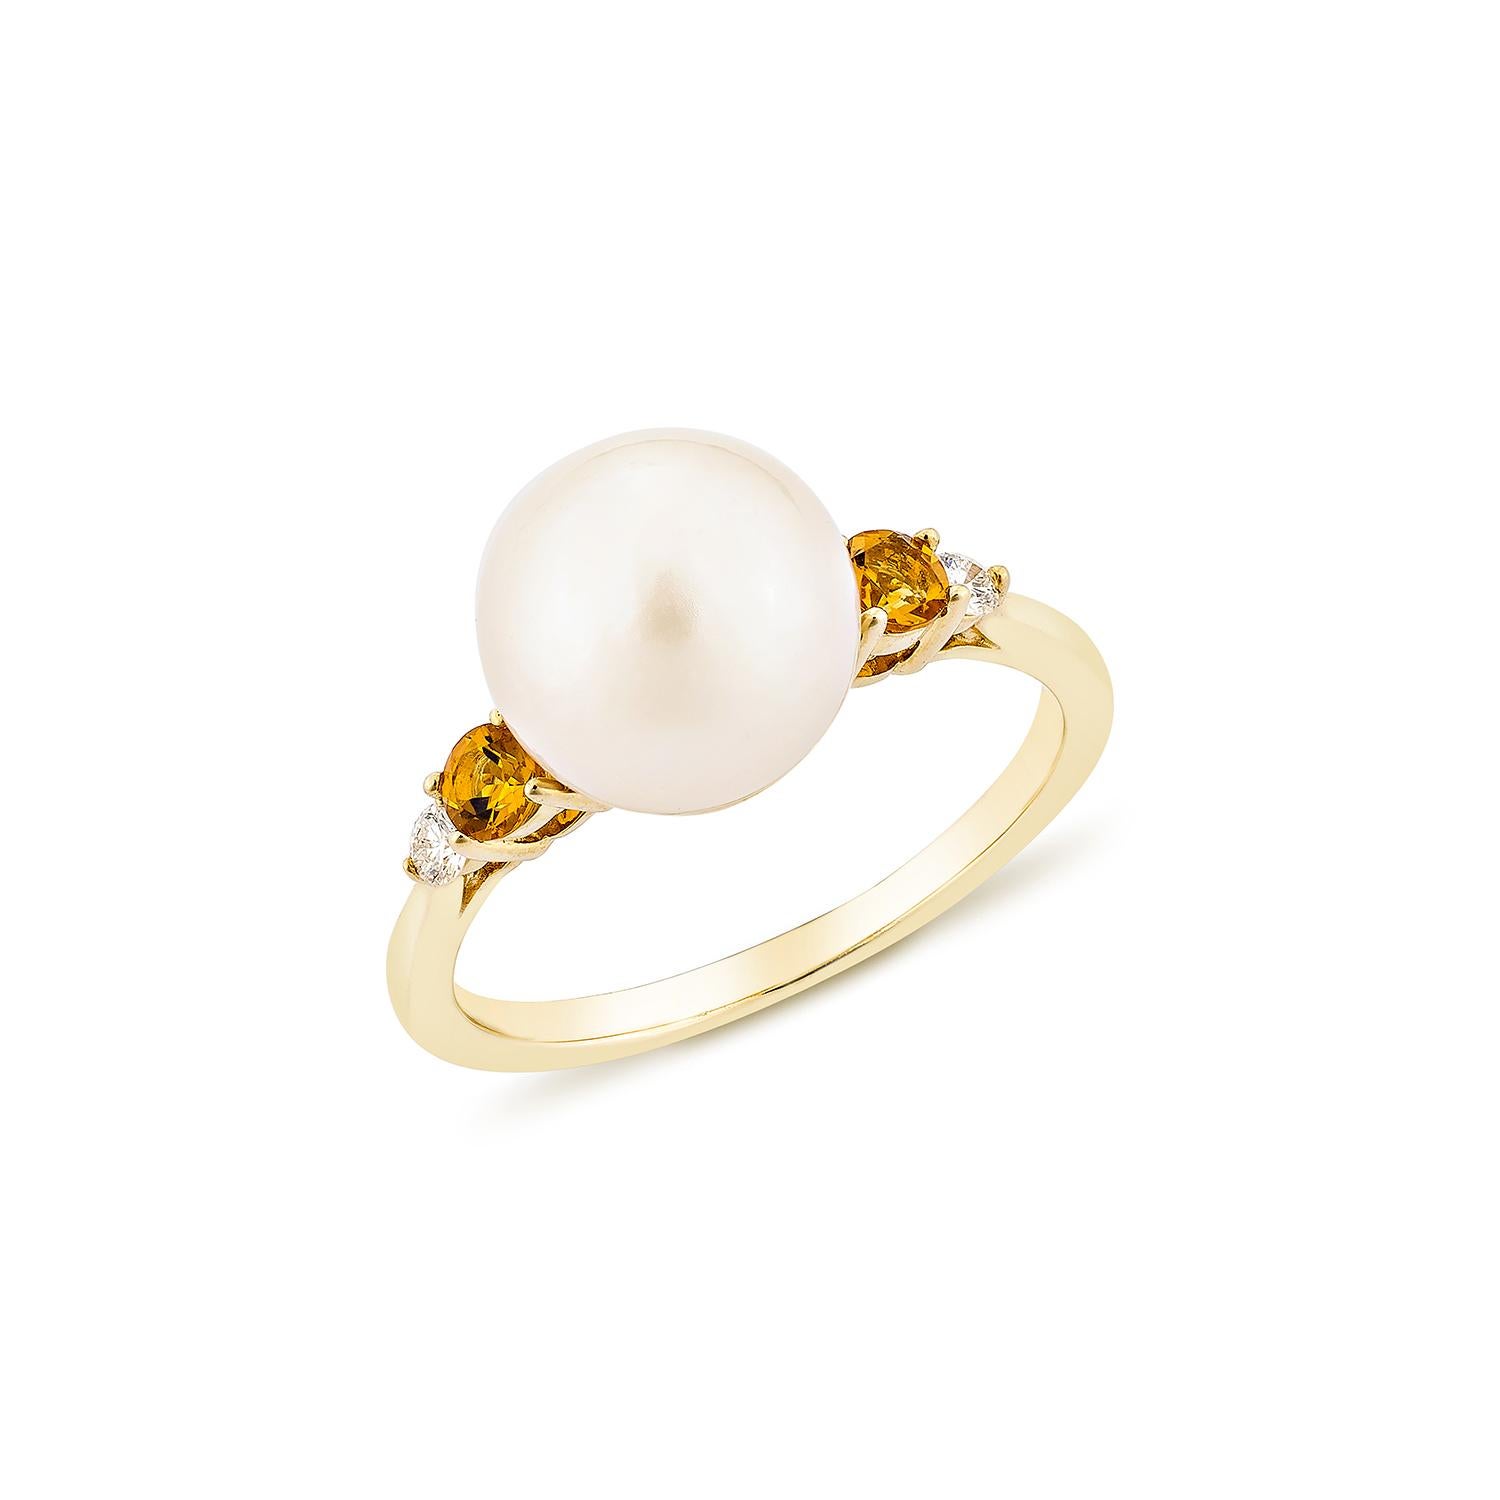 Contemporary 6.25 Carat White Pearl Fancy Ring in 14KYG with citrine and White Diamond. For Sale